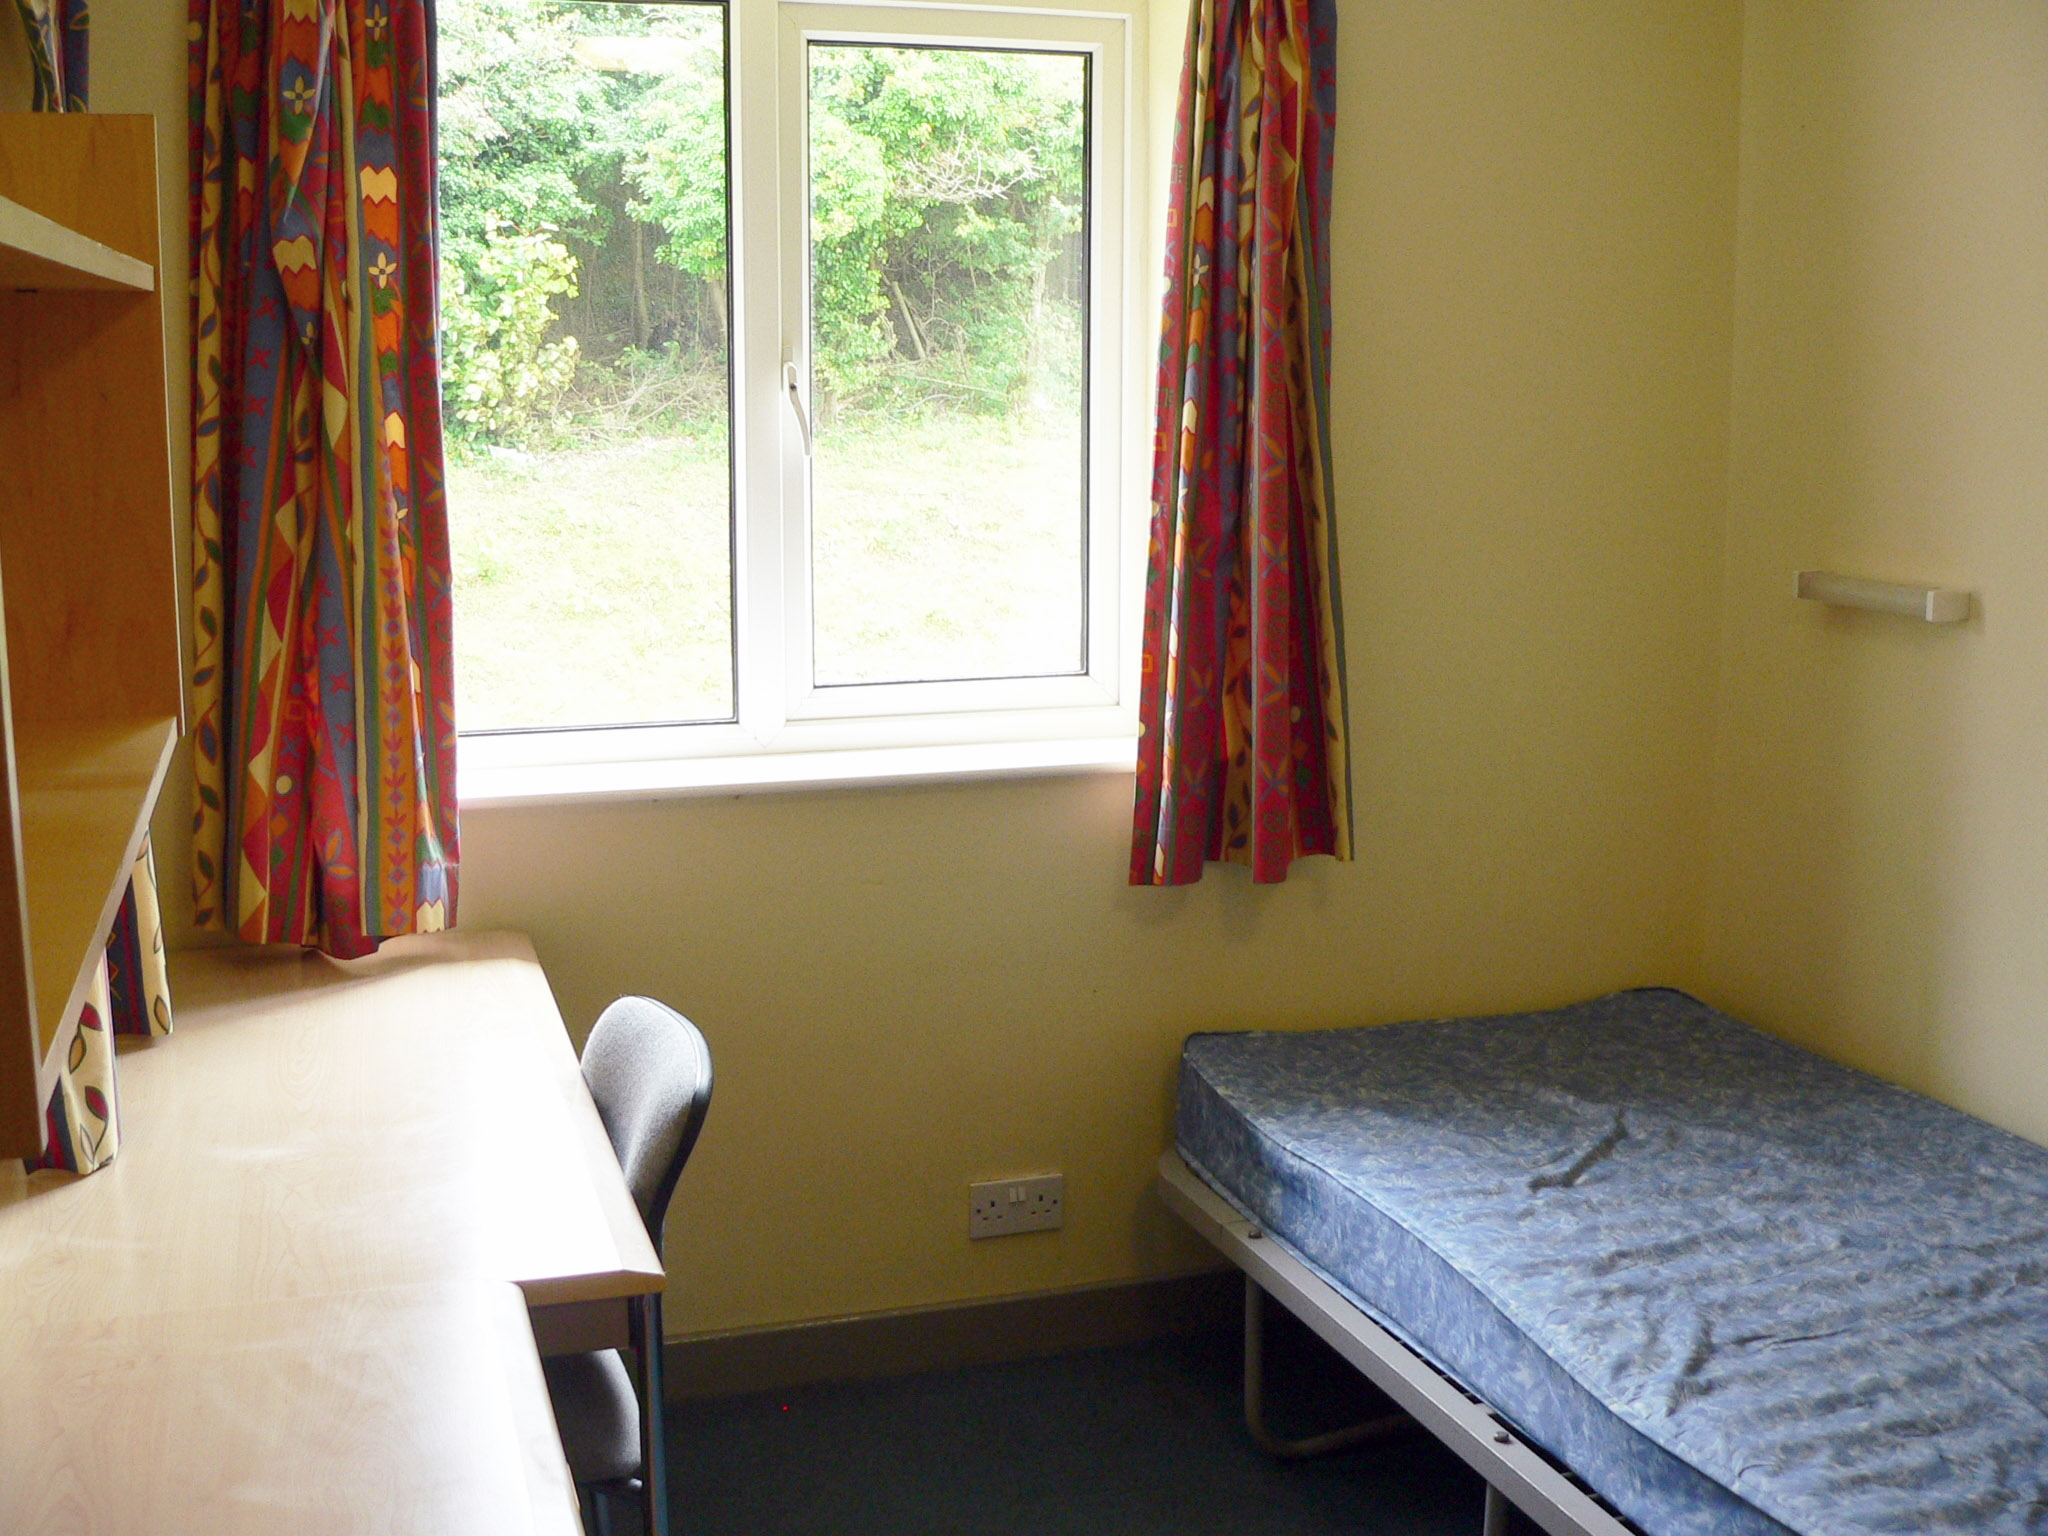 Bedroom in student residence hall in Brighton, England.